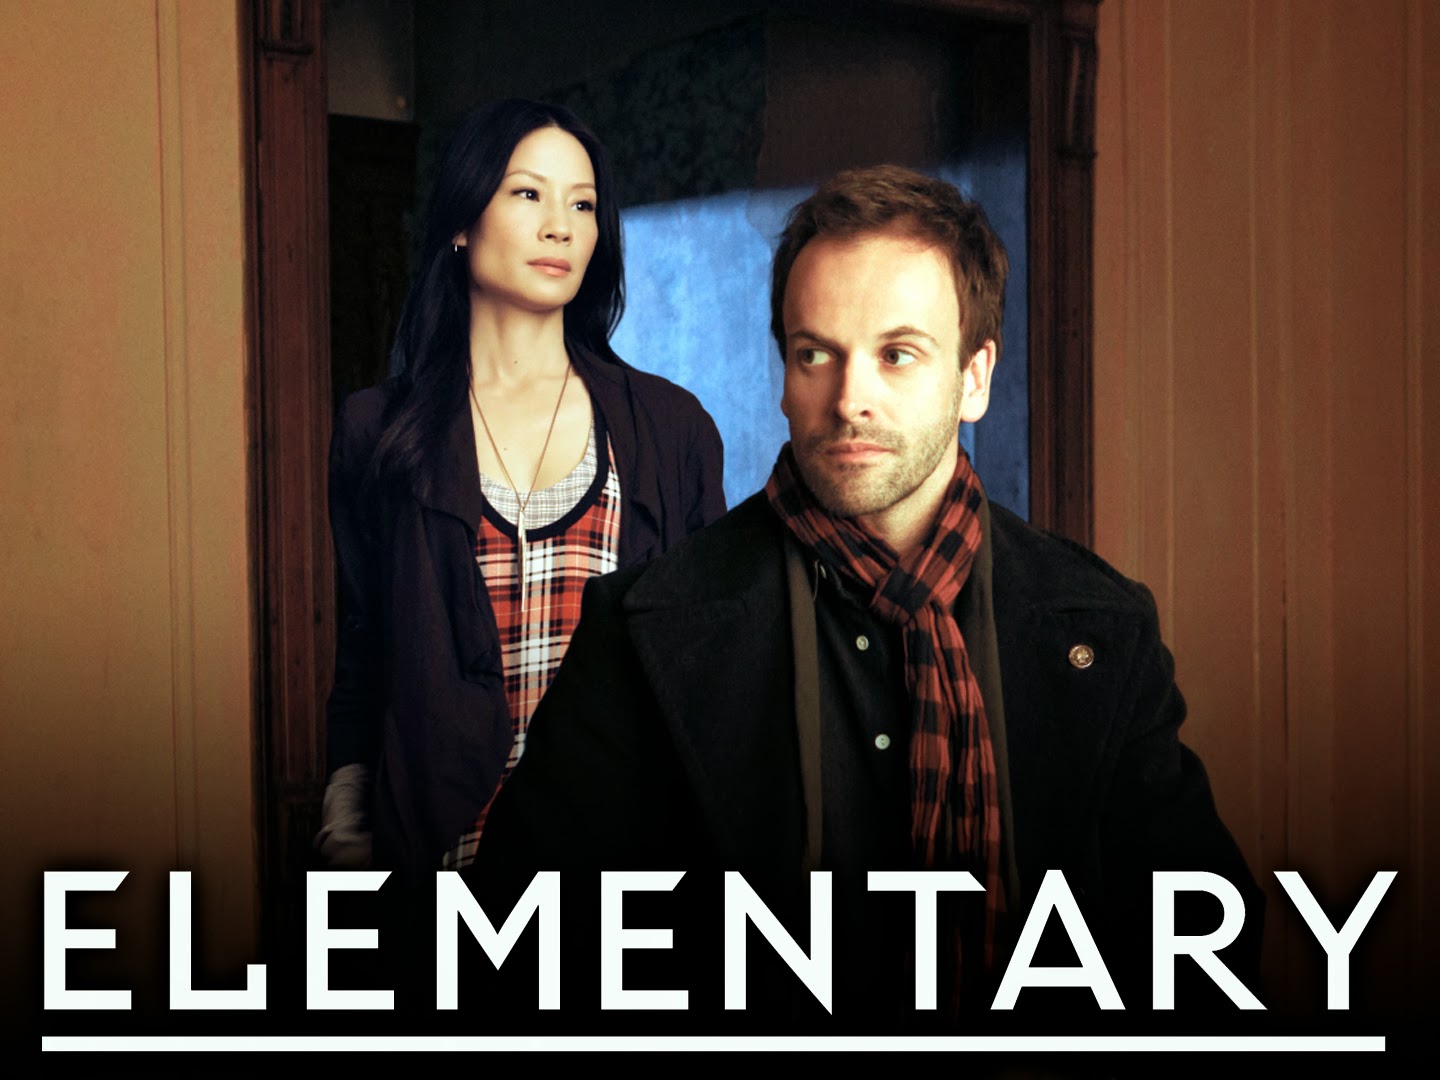 Elementary Season 4 will see the first appearance of Sherlock's mysterious father. The release date for Season 4 has been confirmed. Meanwhile in the real world, series star Lucy Liu has become a mother via surrogate birth.